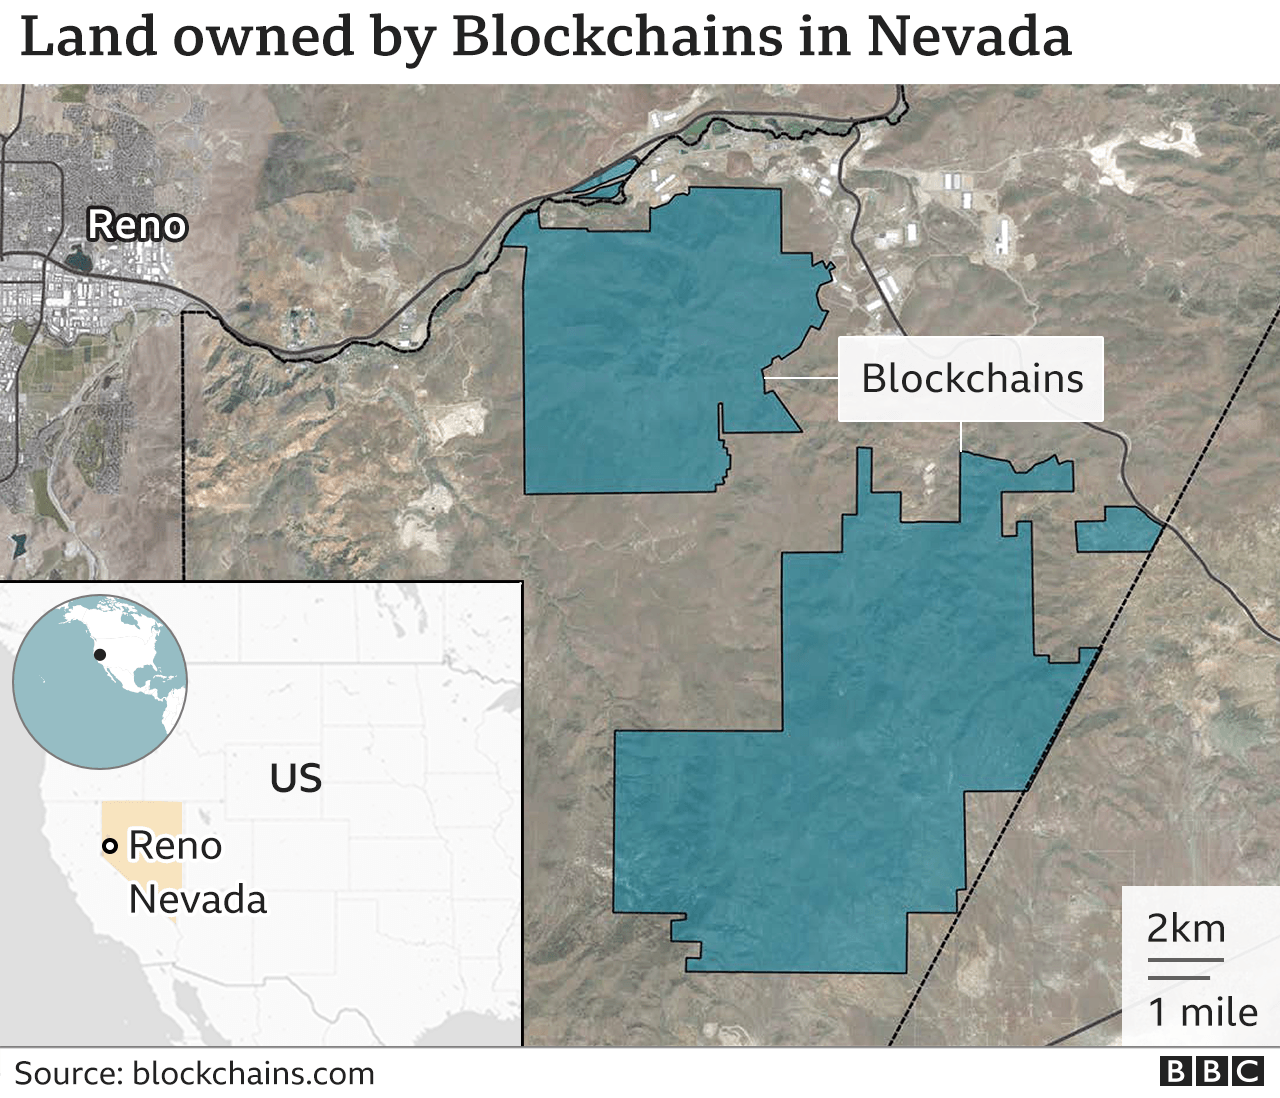 A graphic showing the land owned by Blockchains in Nevada